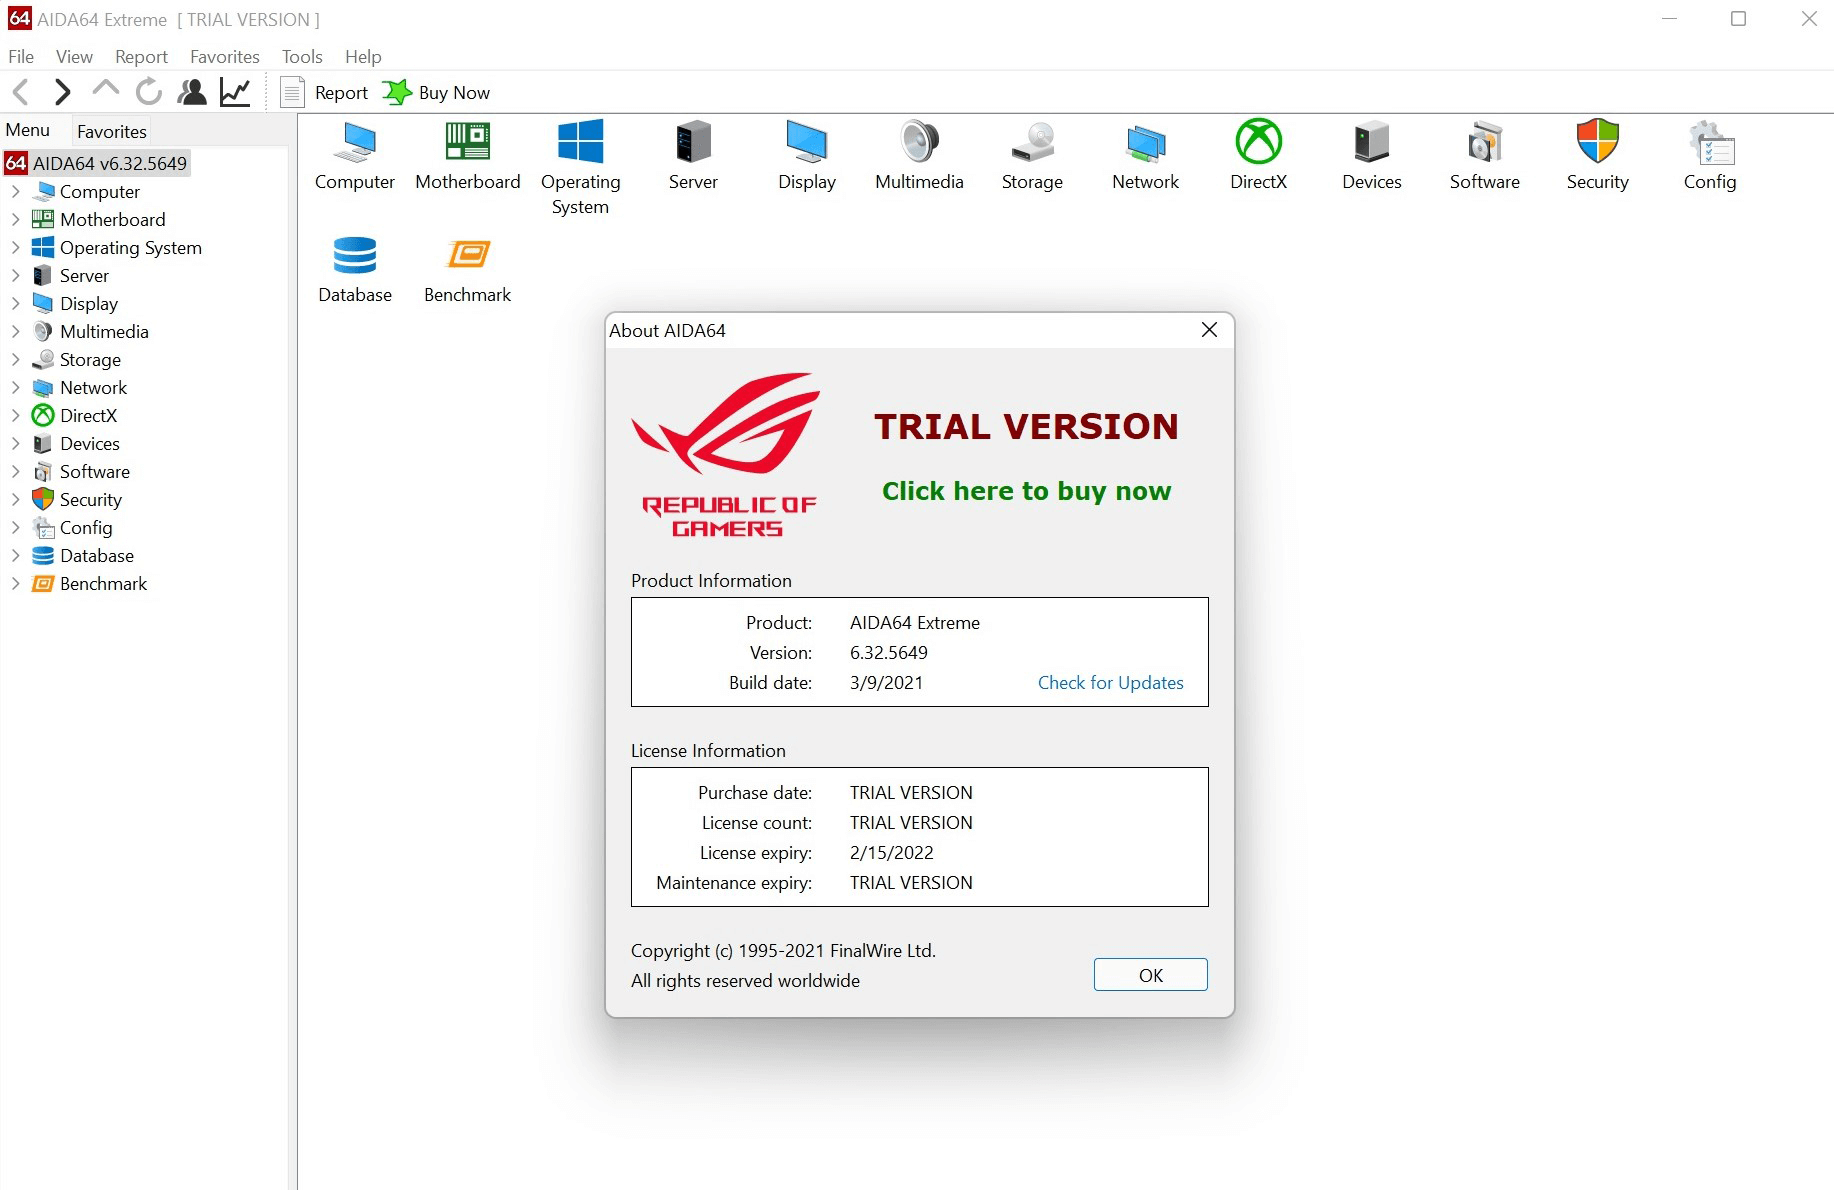 ROG Strix Z790-A comes with a free 60 day trial of AIDA64 Extreme